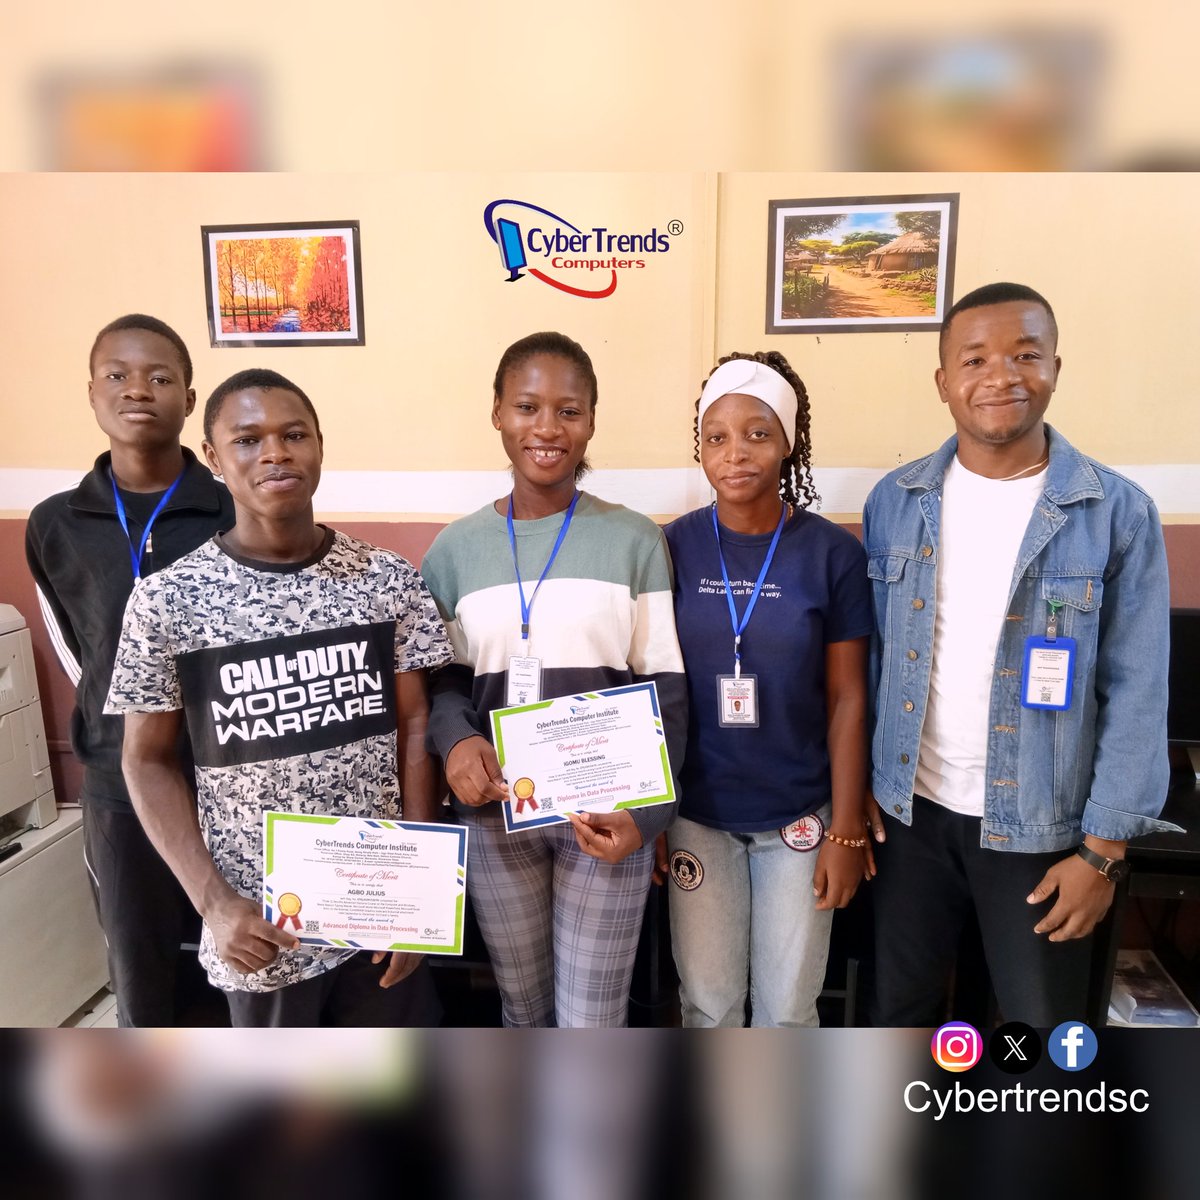 🎓 Congratulations to Techie Julius and Techie Blessing!  Your dedication and brilliance have led you to this milestone. Here's to a future of #Innovation, #Success, and limitless possibilities. Keep soaring high! 👏👩‍🎓👨‍🎓 #TechExcellence #GraduationJoy #NextGenLeaders